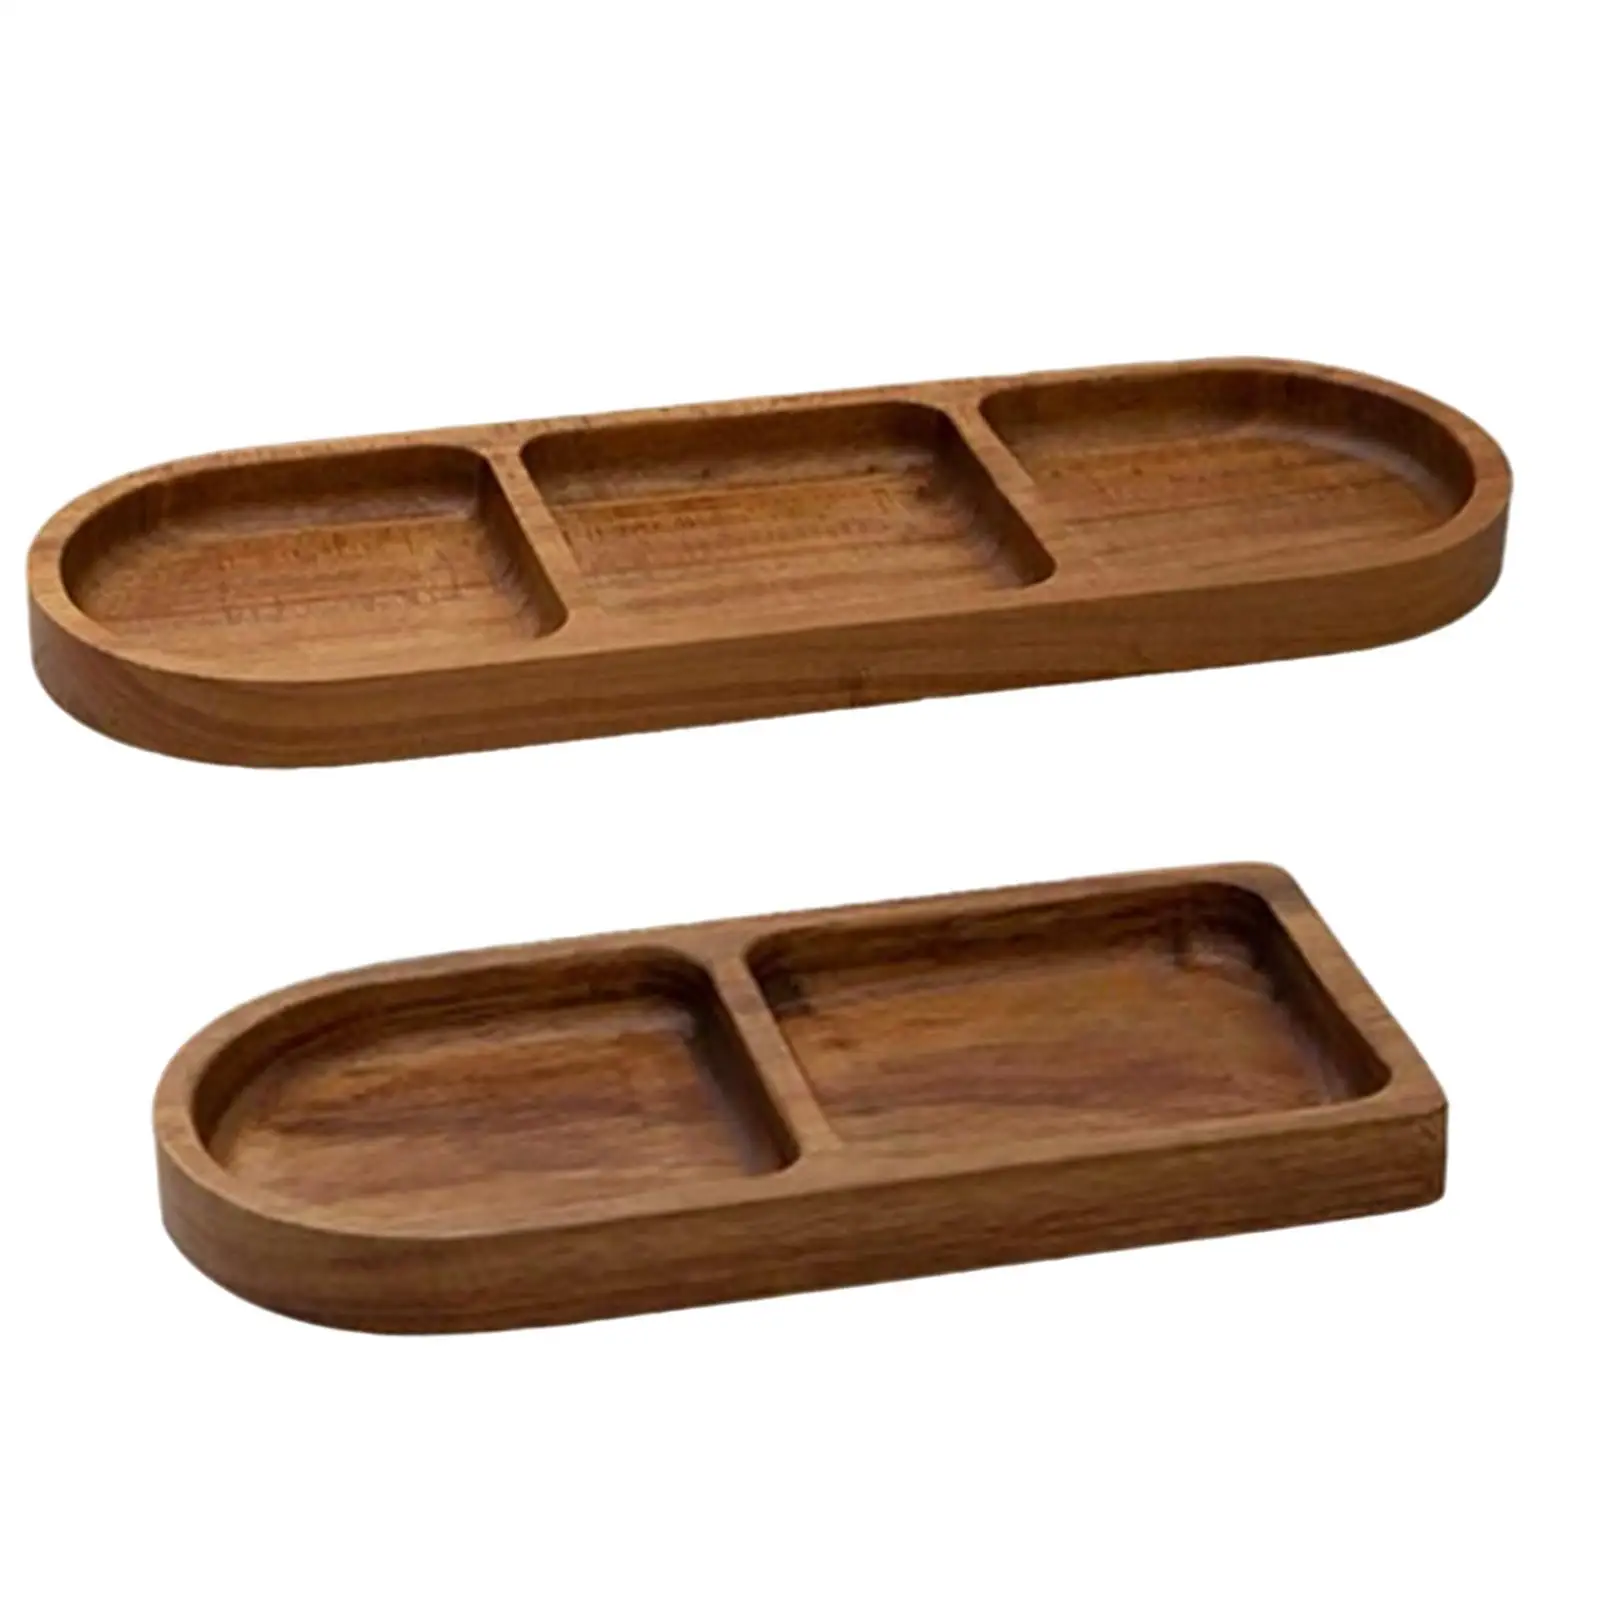 Compartmentalized Tray Kitchen Accessory Retro Style ,Tableware Serving Dish Wooden for Bread ,Grilling Salad Breakfast Home